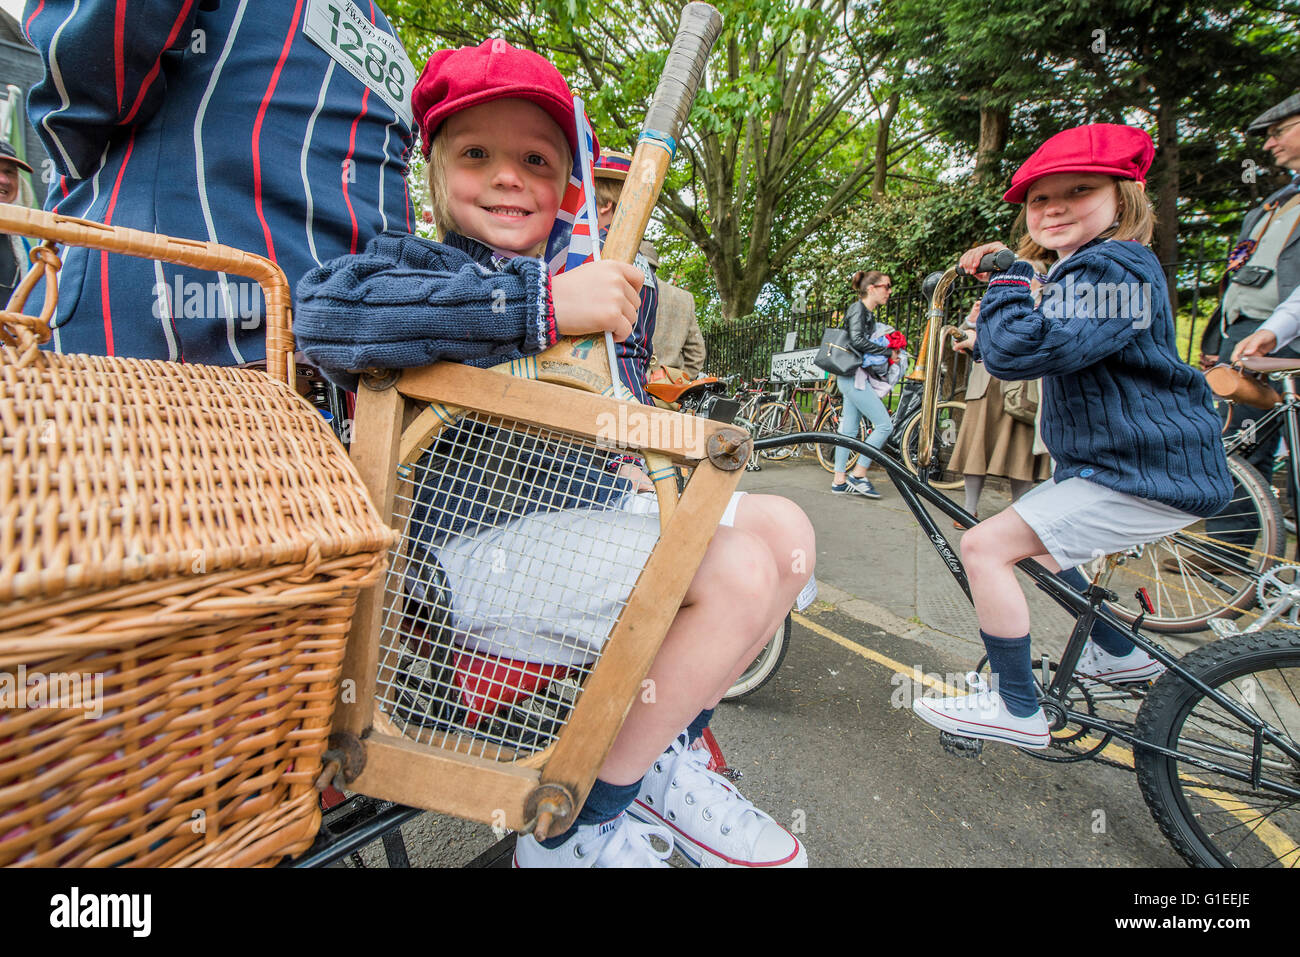 London, UK. 14th May, 2016. A family on a three man bike and tricycle in matching blazers - The Tweed Run, a very British public bicycle ride through London’s streets, with a prerequisite that participants are dressed in their best tweed cycling attire. Now in it's 8th year the ride follows a circular route from Clerkenwell via the Albert Memorial, Buckinham Palace and Westminster. Credit:  Guy Bell/Alamy Live News Stock Photo